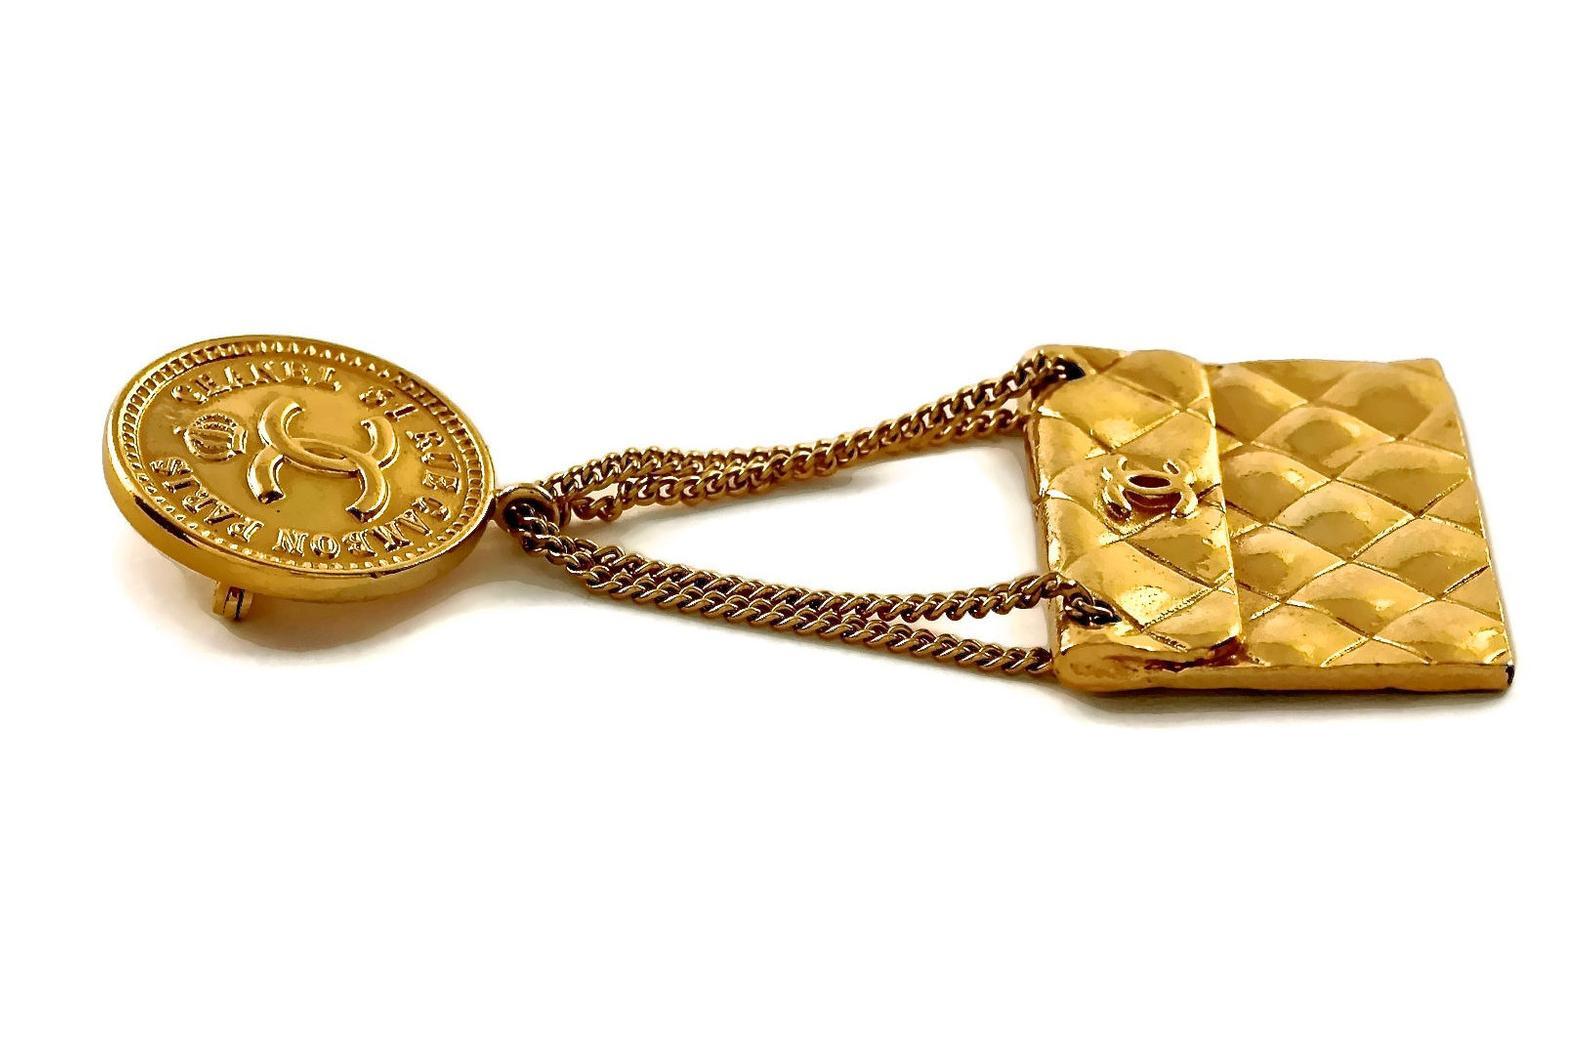 Vintage Iconic CHANEL Logo Coin Quilted Flap Purse Brooch

Measurements:
Height: 2.95 inches (7.5 cm)
Width: 1.33 inches (3.4 cm)

Features:
- 100% Authentic CHANEL.
- Coin with Chanel logo and address (top part).
- Dangling iconic Chanel 2.55